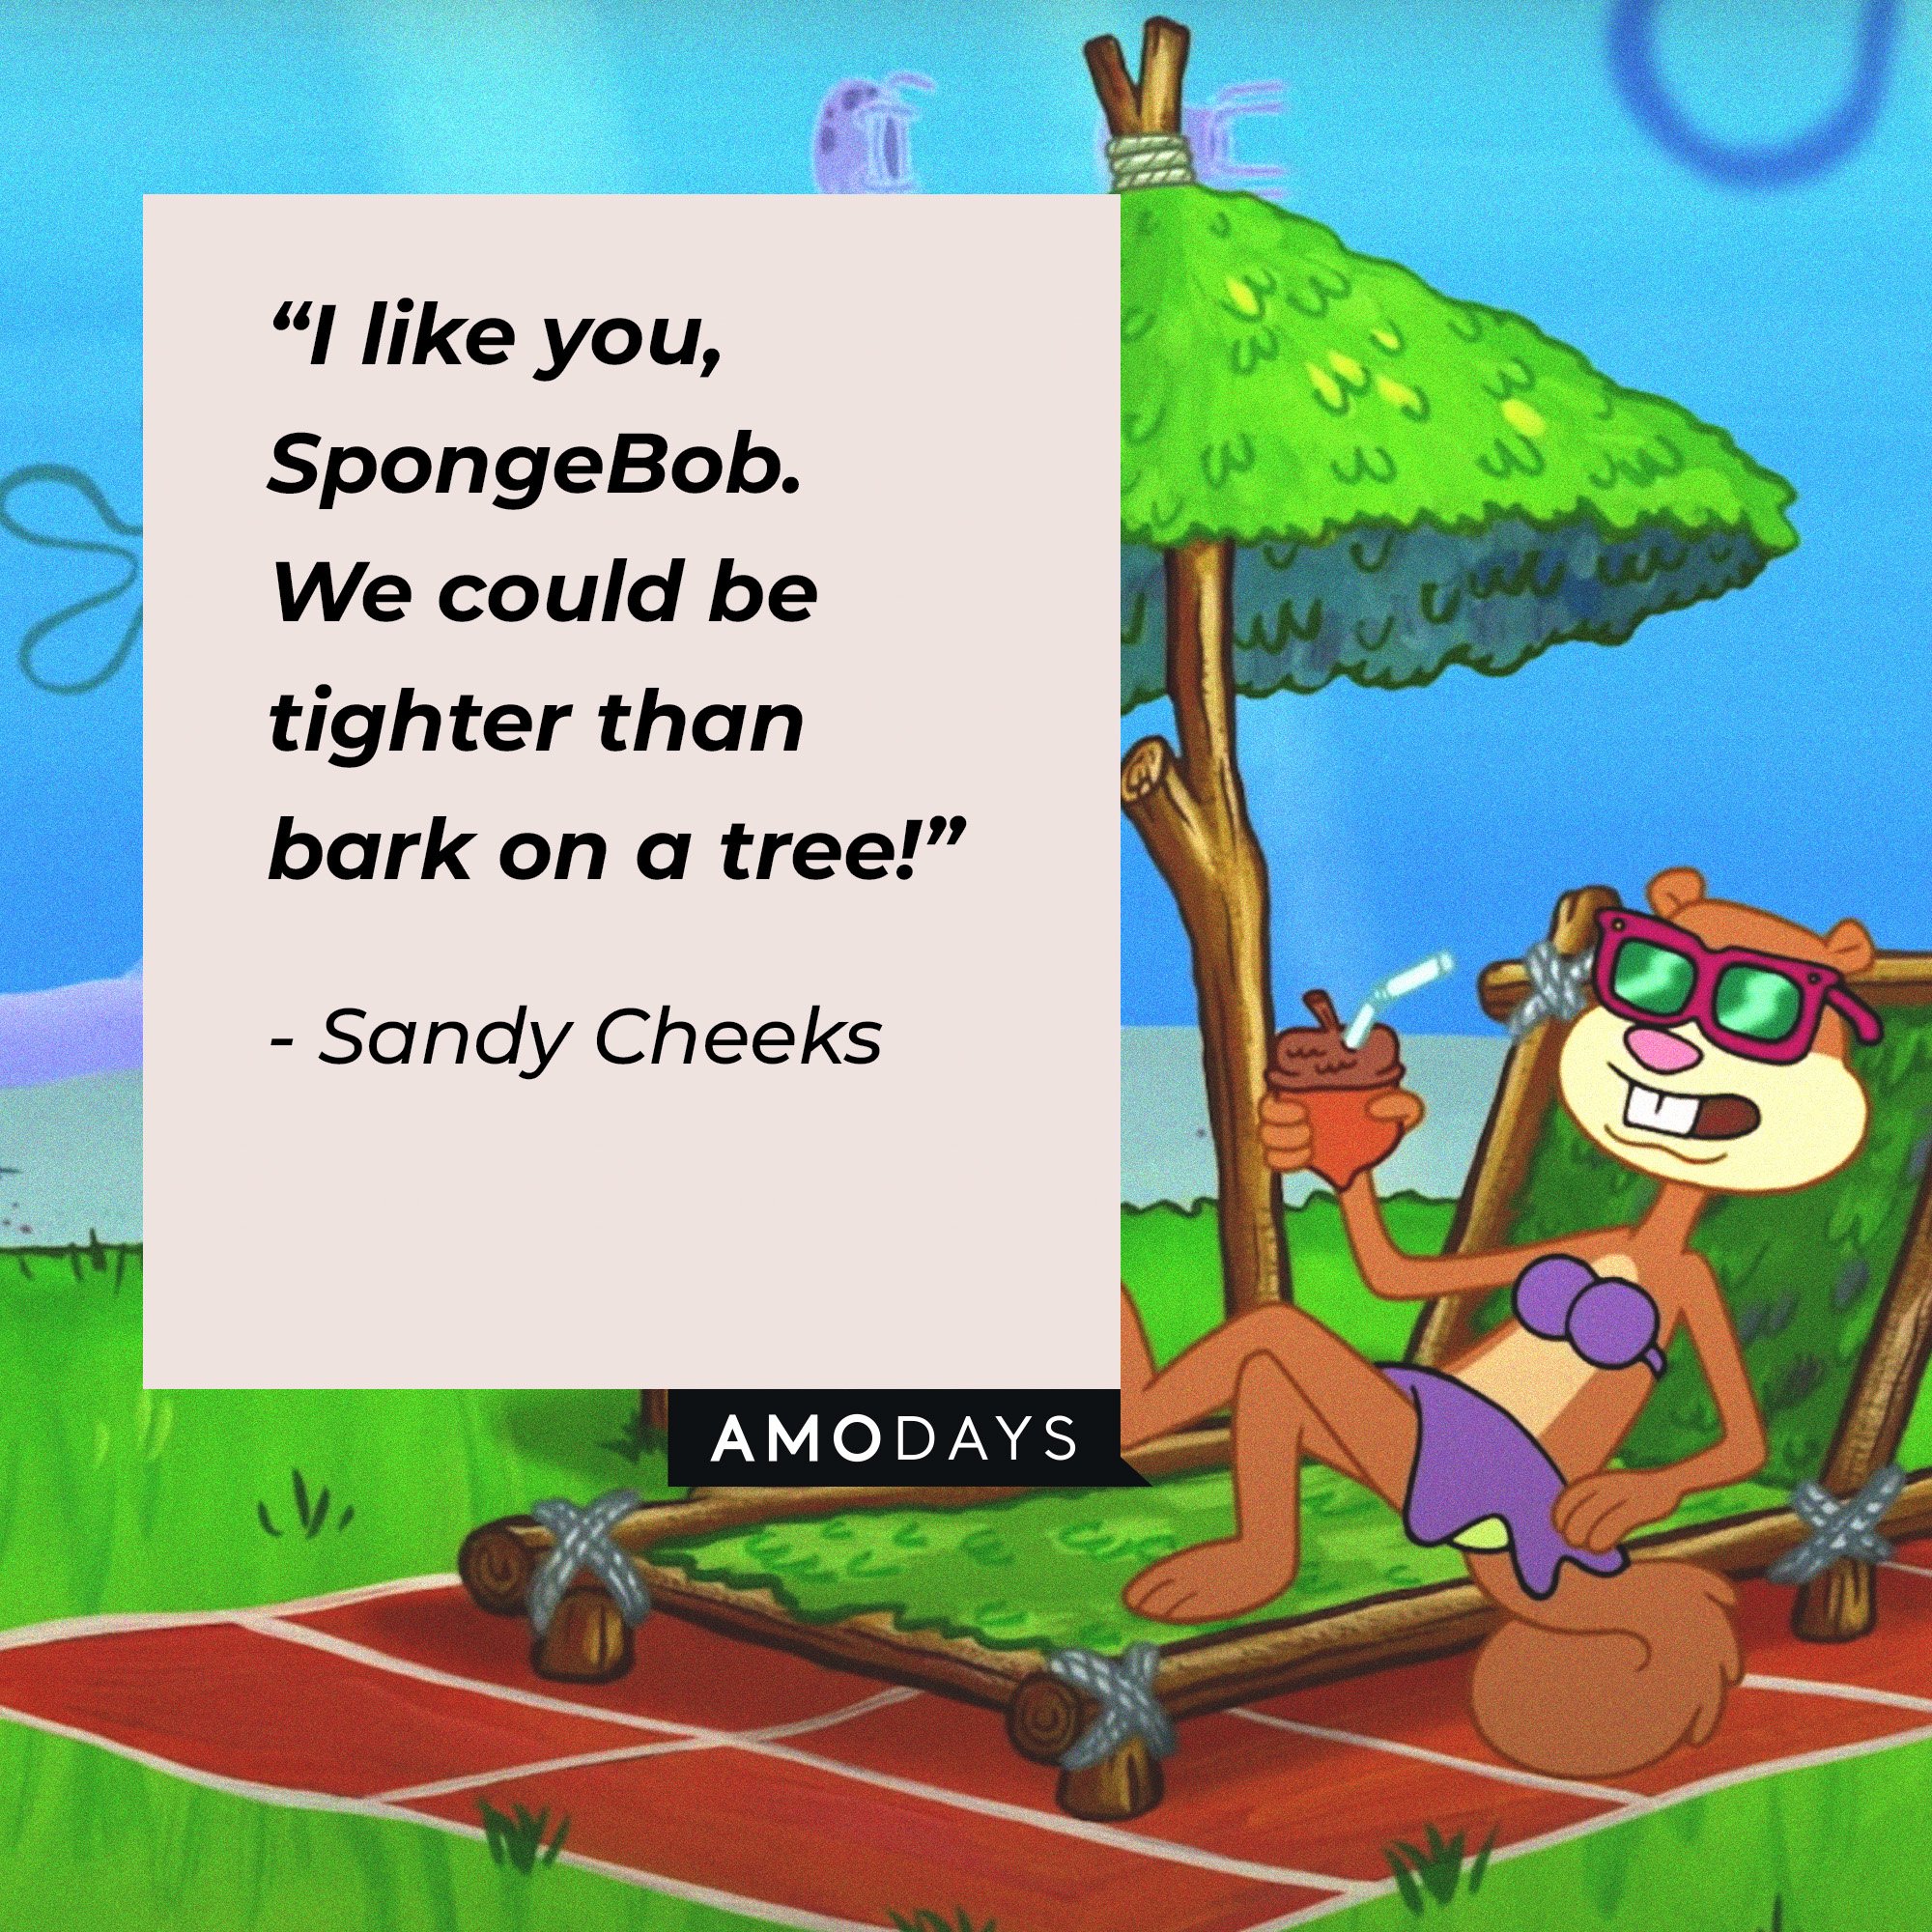 Sandy Cheeks's quote: “I like you, SpongeBob. We could be tighter than bark on a tree!” | Image: AmoDays 